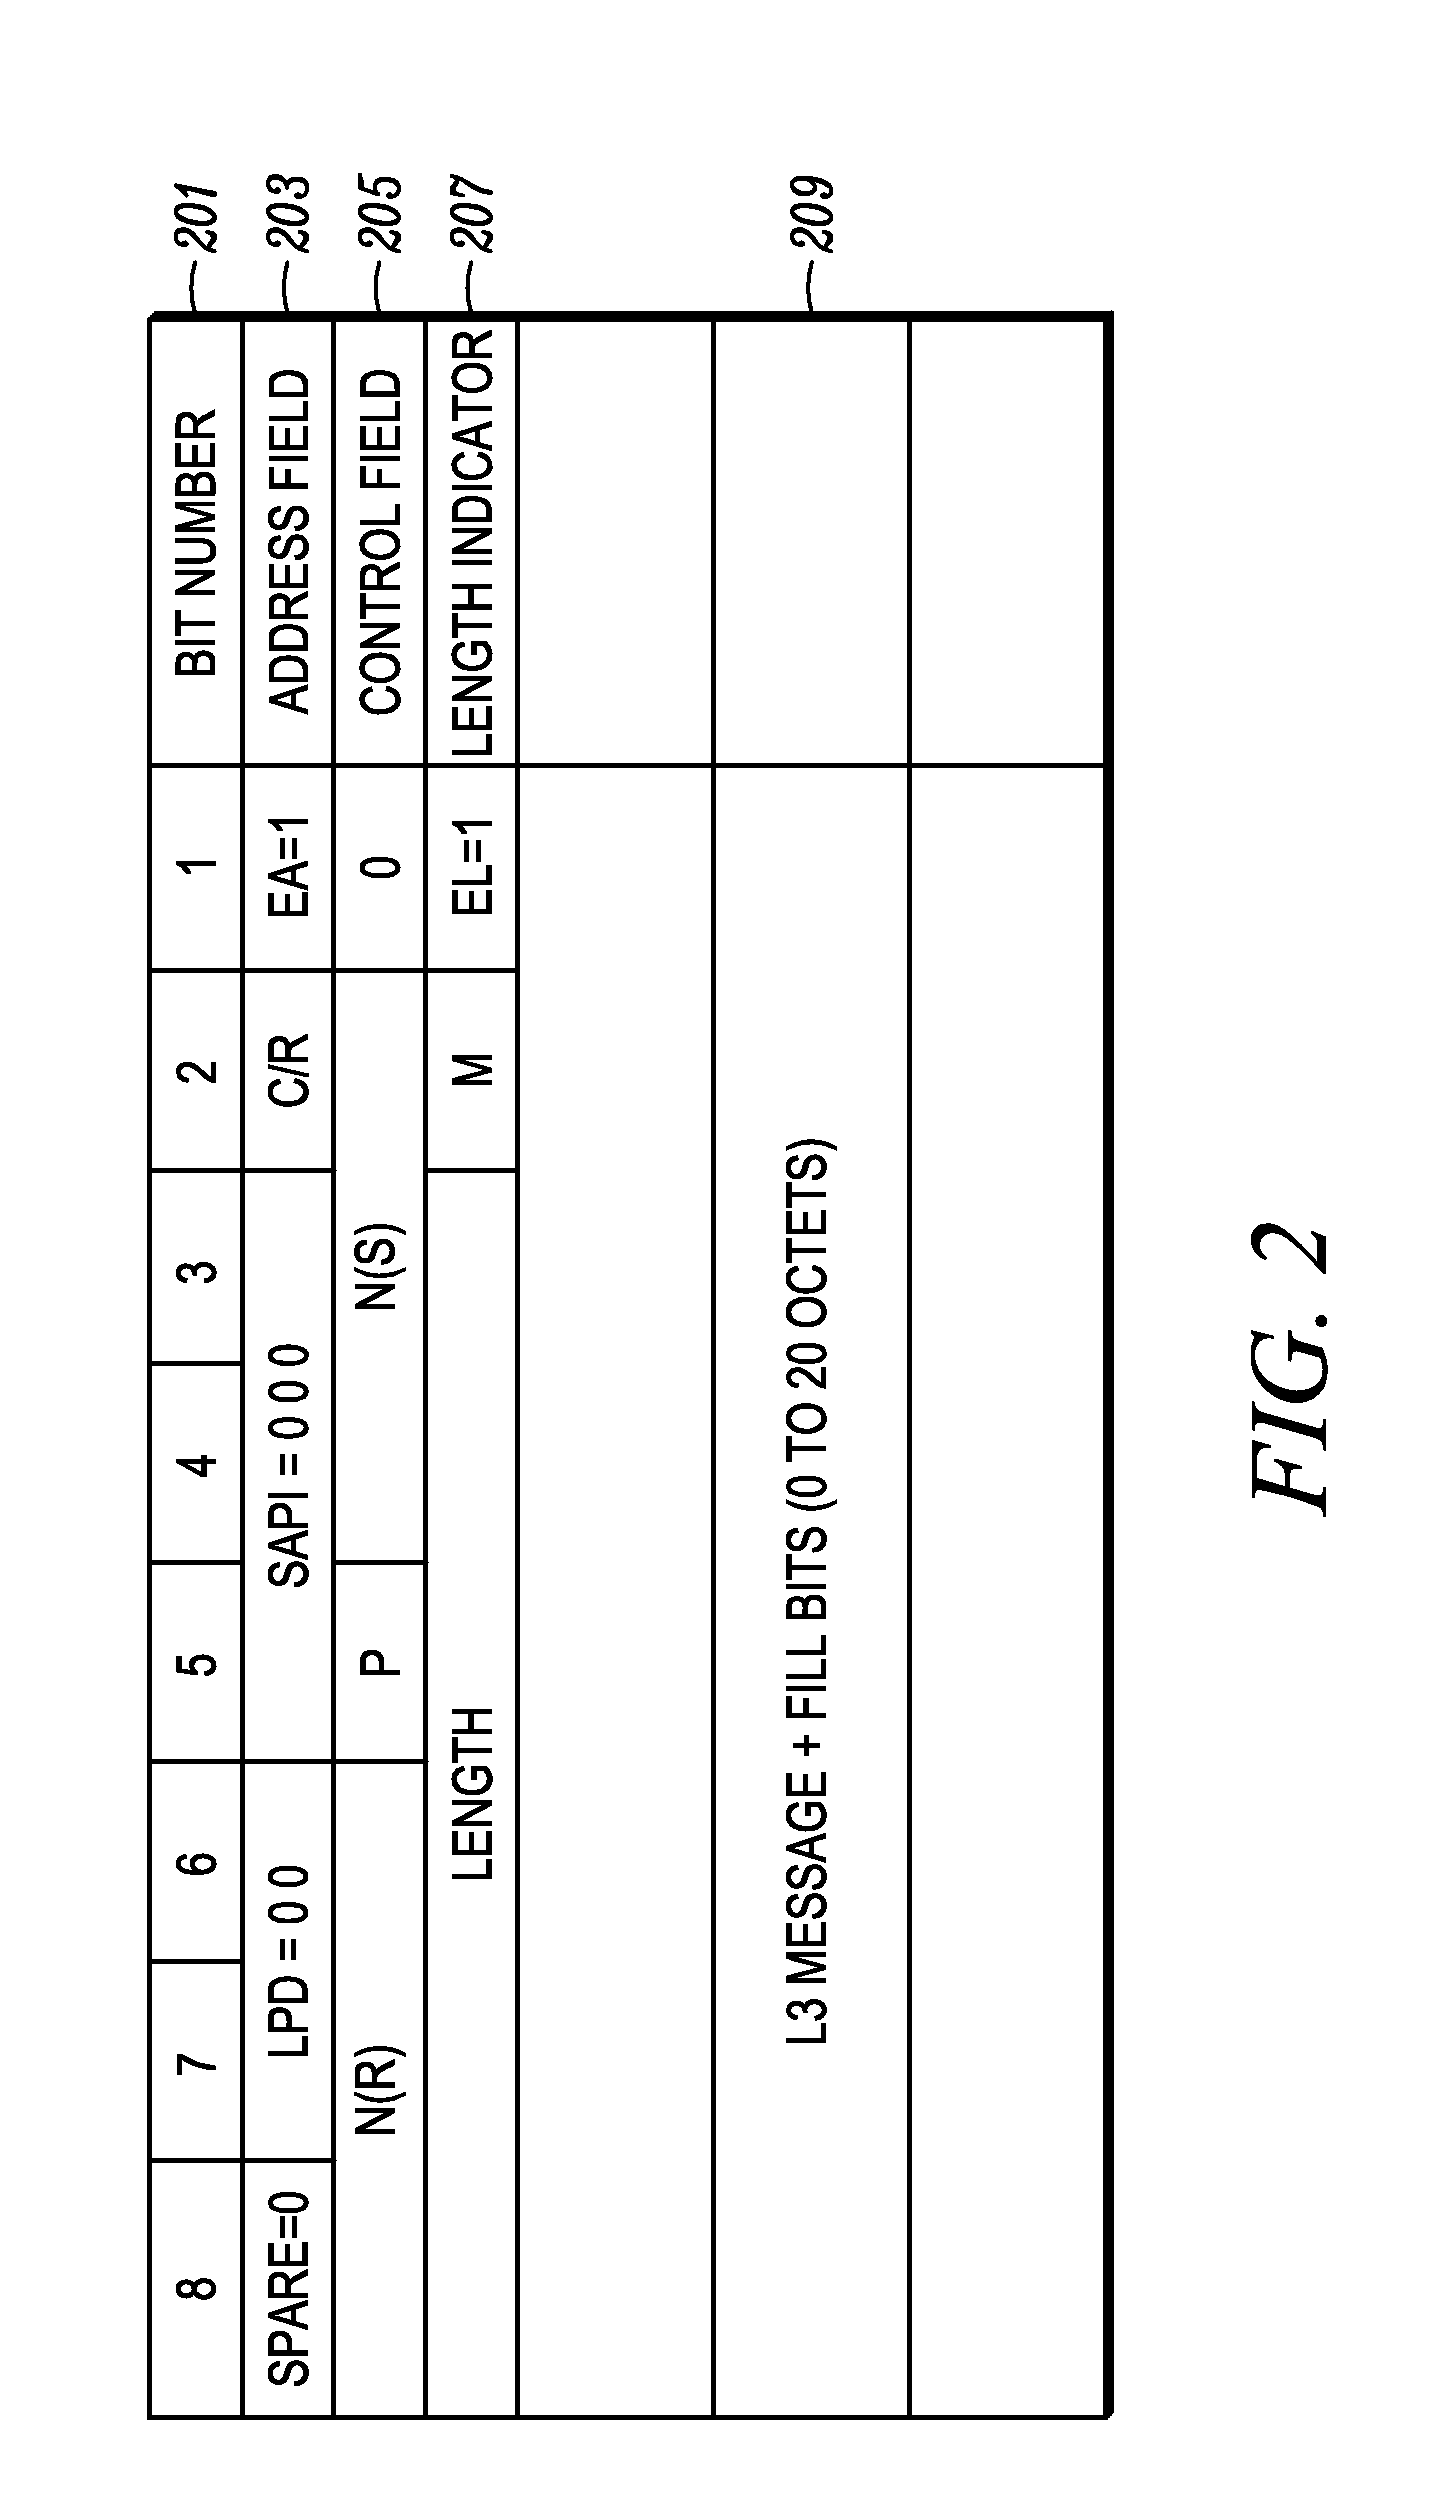 Apparatus and methods for jointly decoding messages based on apriori knowledge of modified codeword transmission